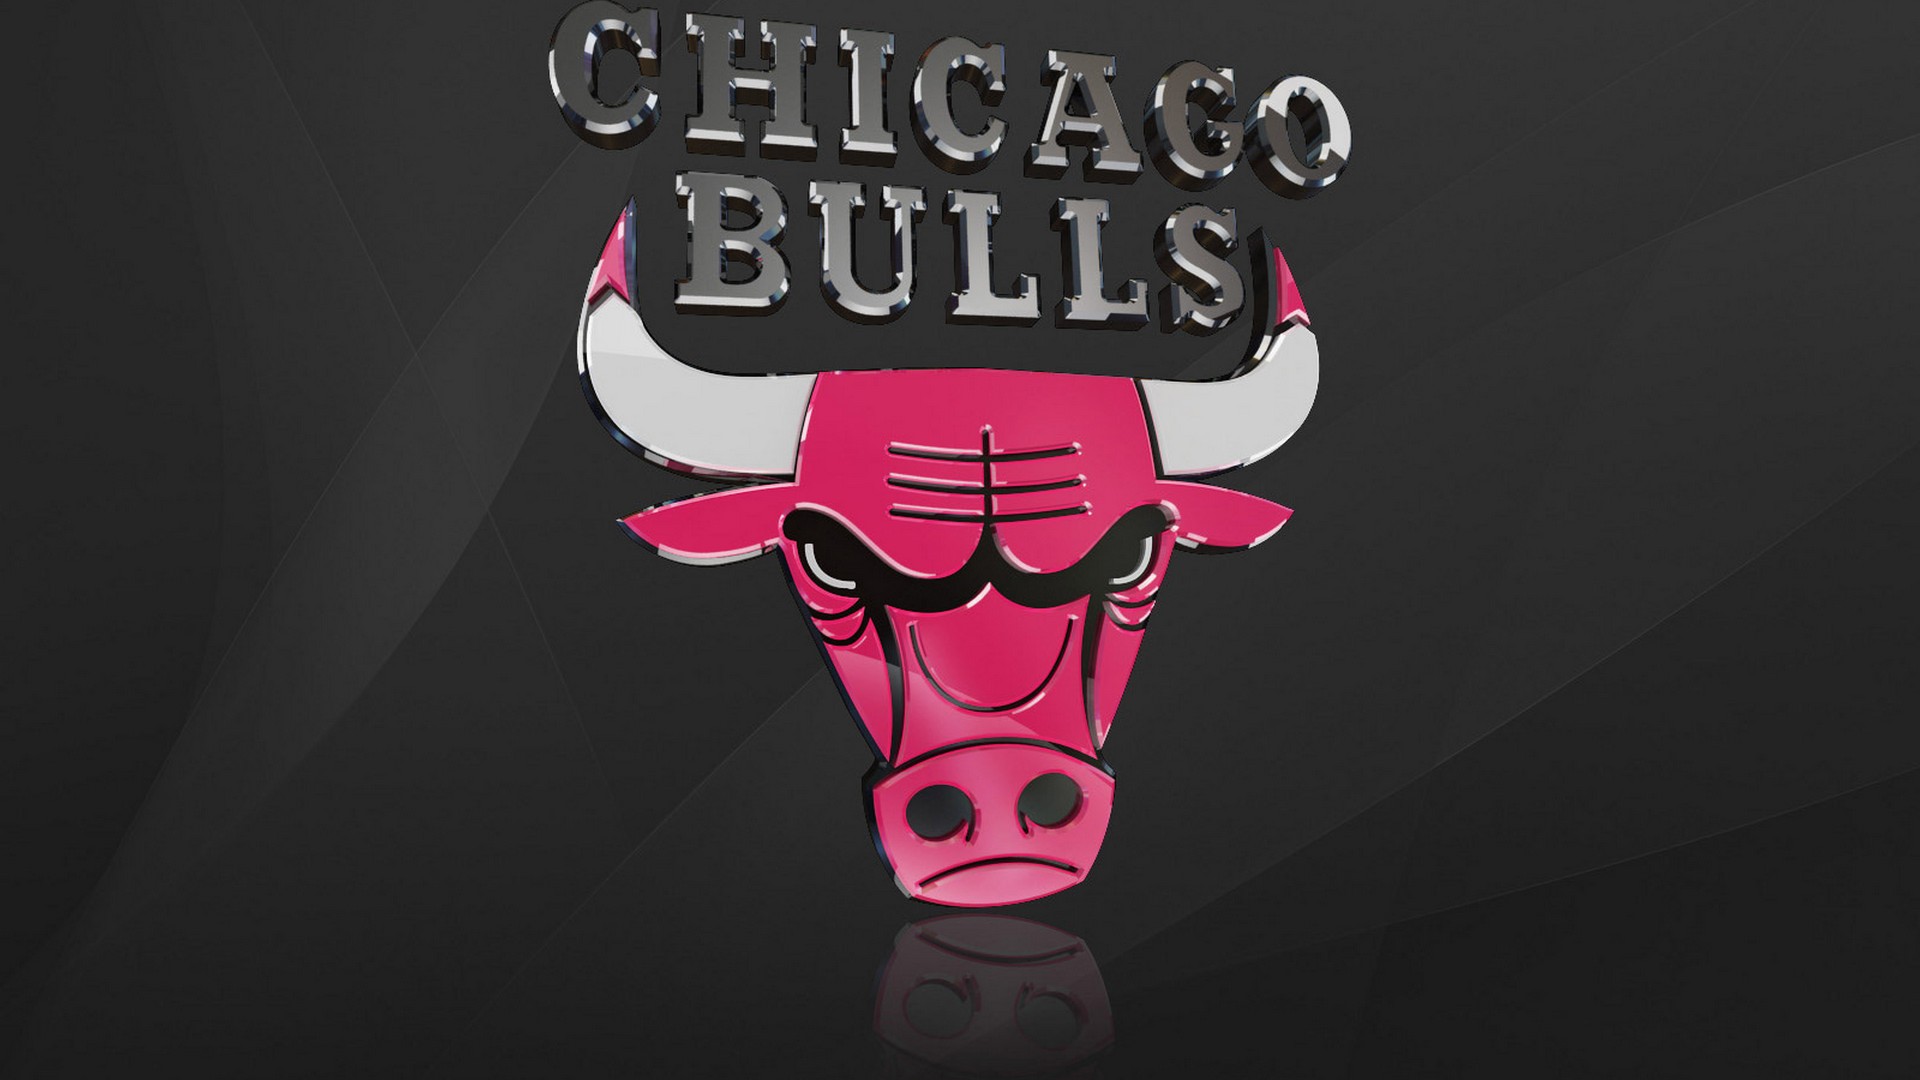 Wallpaper Desktop Chicago Bulls HD with high-resolution 1920x1080 pixel. You can use this wallpaper for your Desktop Computer Backgrounds, Windows or Mac Screensavers, iPhone Lock screen, Tablet or Android and another Mobile Phone device